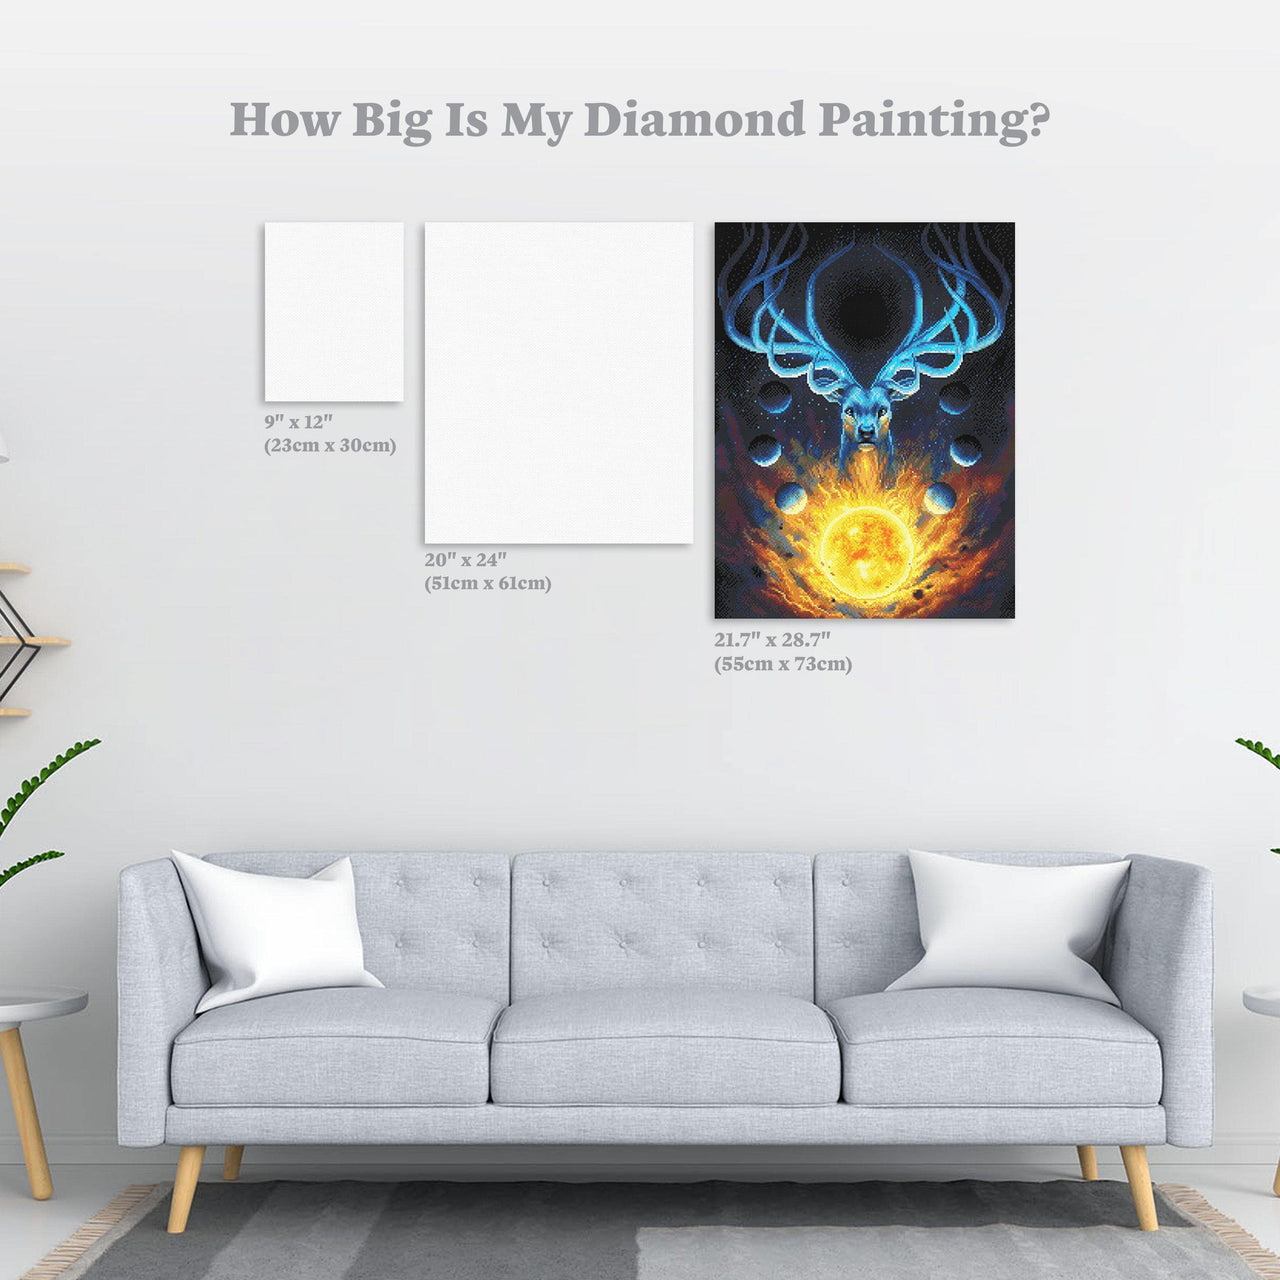 Diamond Painting Celestial 55cm x 73cm (21.7" x 28.7") / Round With 34 Colors Including 2 ABs / 50,313